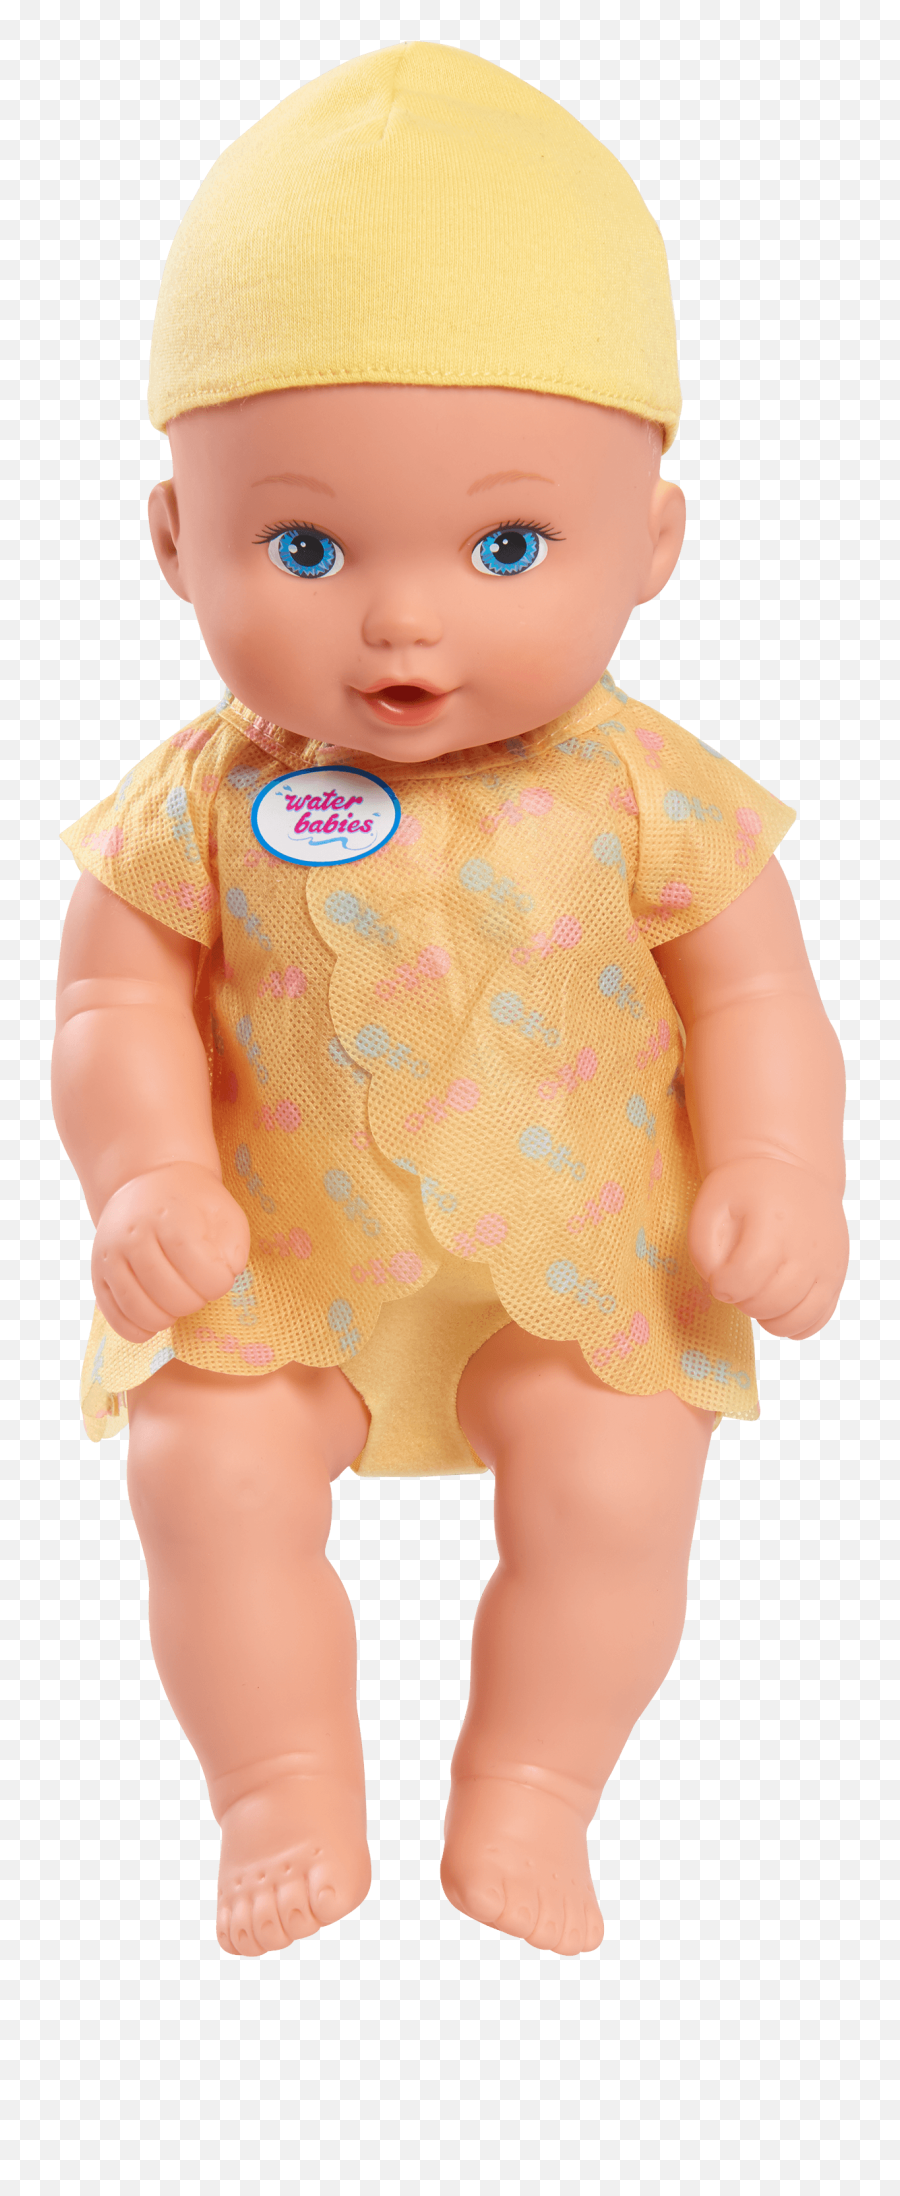 Magic Wonder Waterbaby - Water Baby Boy Doll Png,Baby Doll Png